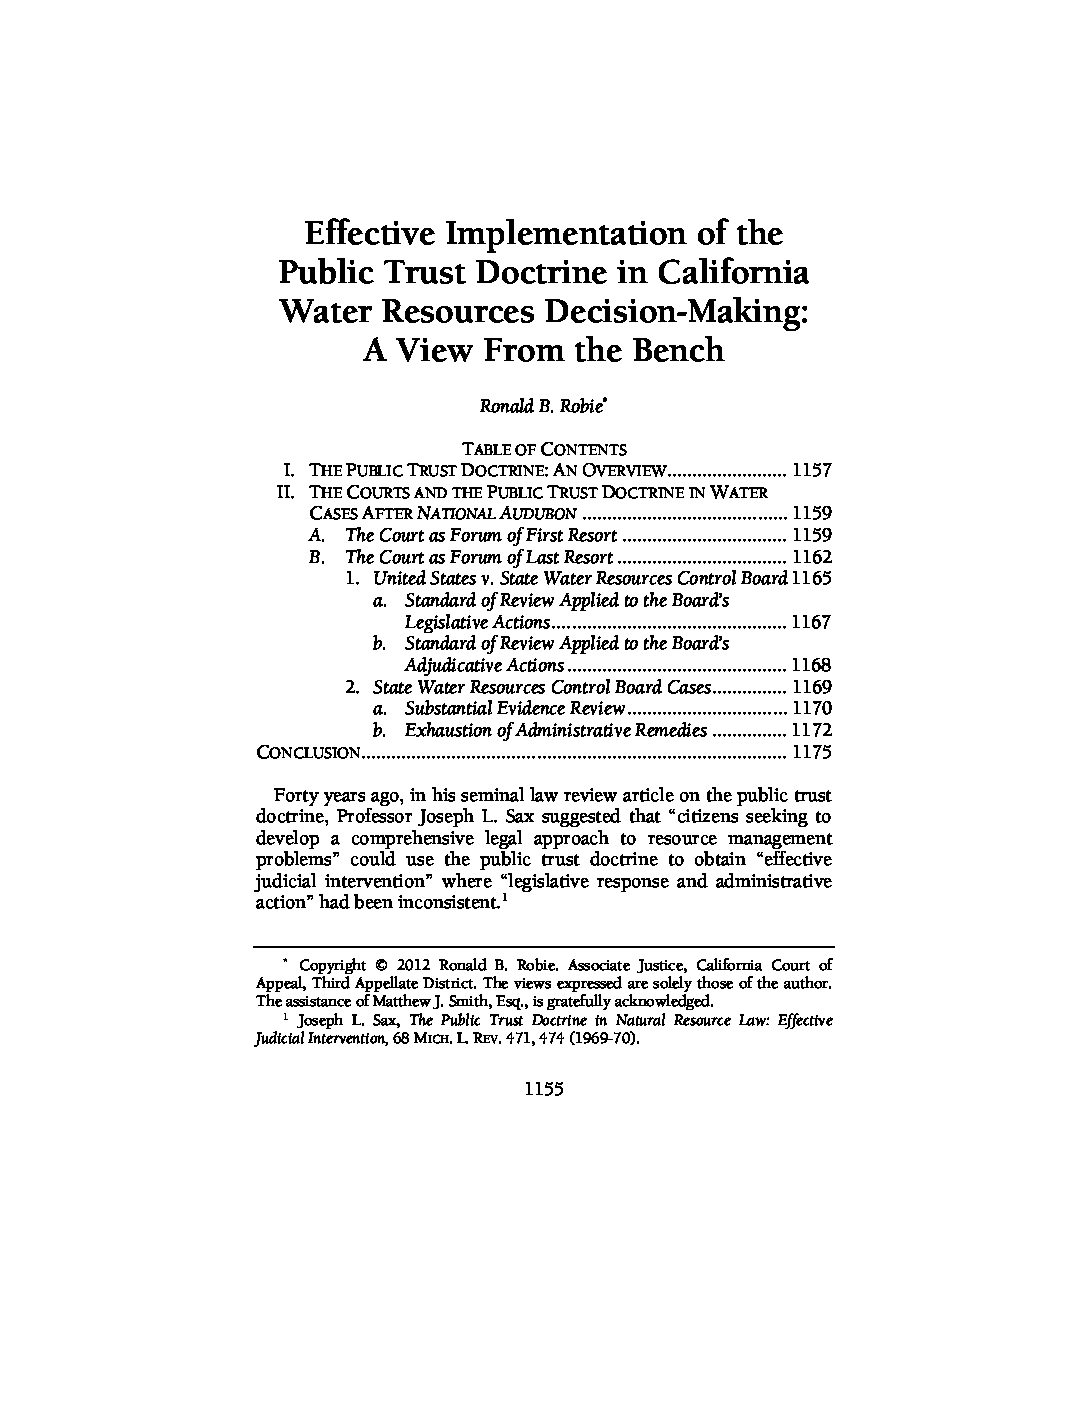 Effective Implementation of the Public Trust Doctrine in California Water Resources Decision-Making: A View From the Bench